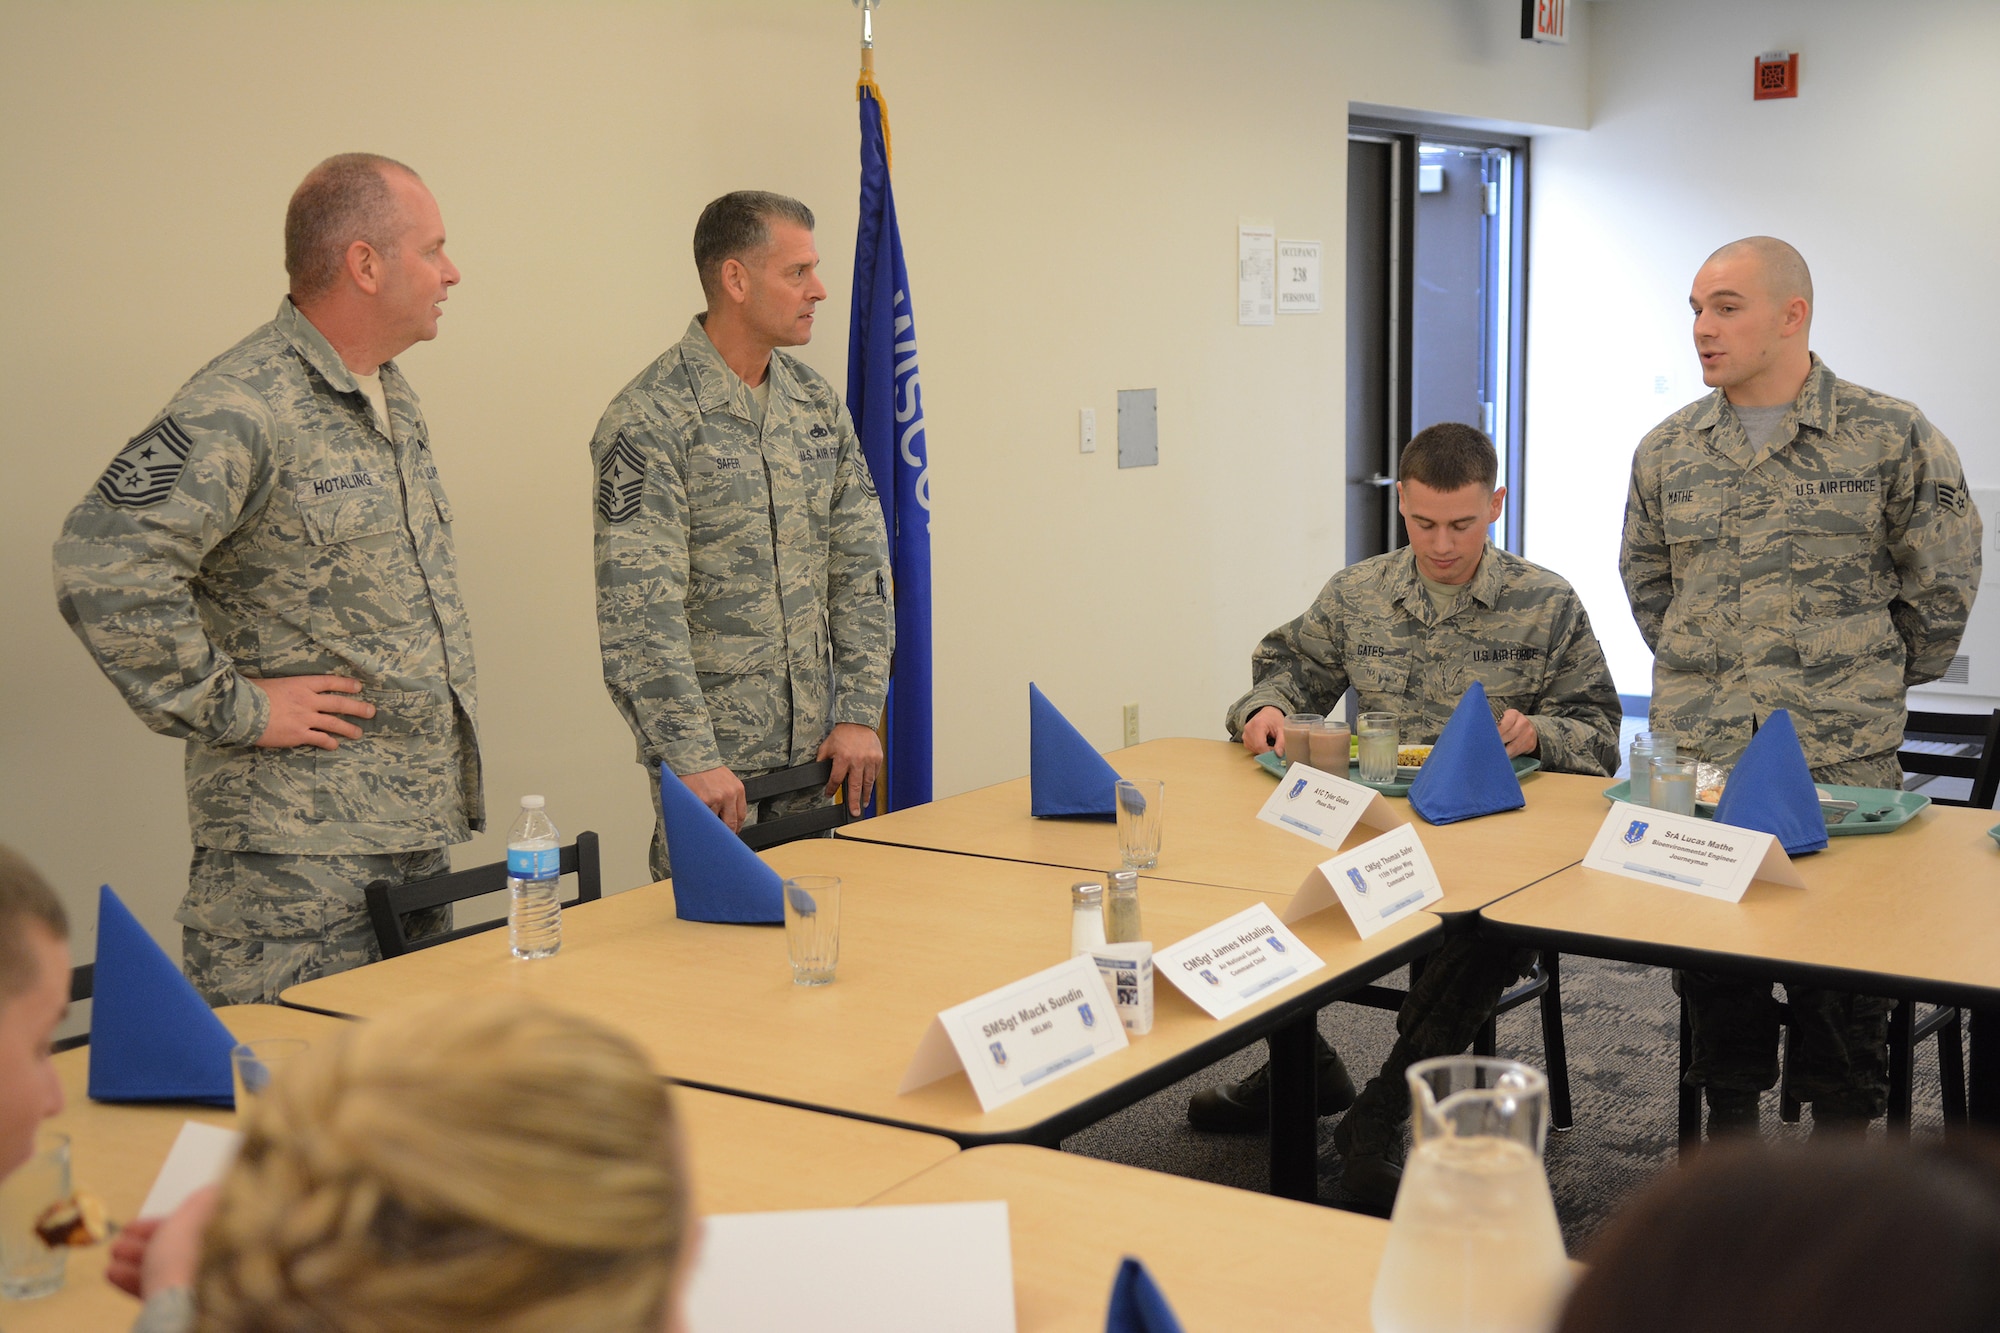 Chief Master Sgt. James W. Hotaling, Air National Guard command chief, joins Airmen of the 115th Fighter Wing for lunch in Madison, Wis., Dec. 6, 2015. The luncheon gave selected Airmen a chance to meet and discuss various topics with Hotaling. (U.S. Air National Guard photo by Senior Airman Kyle P. Russell)